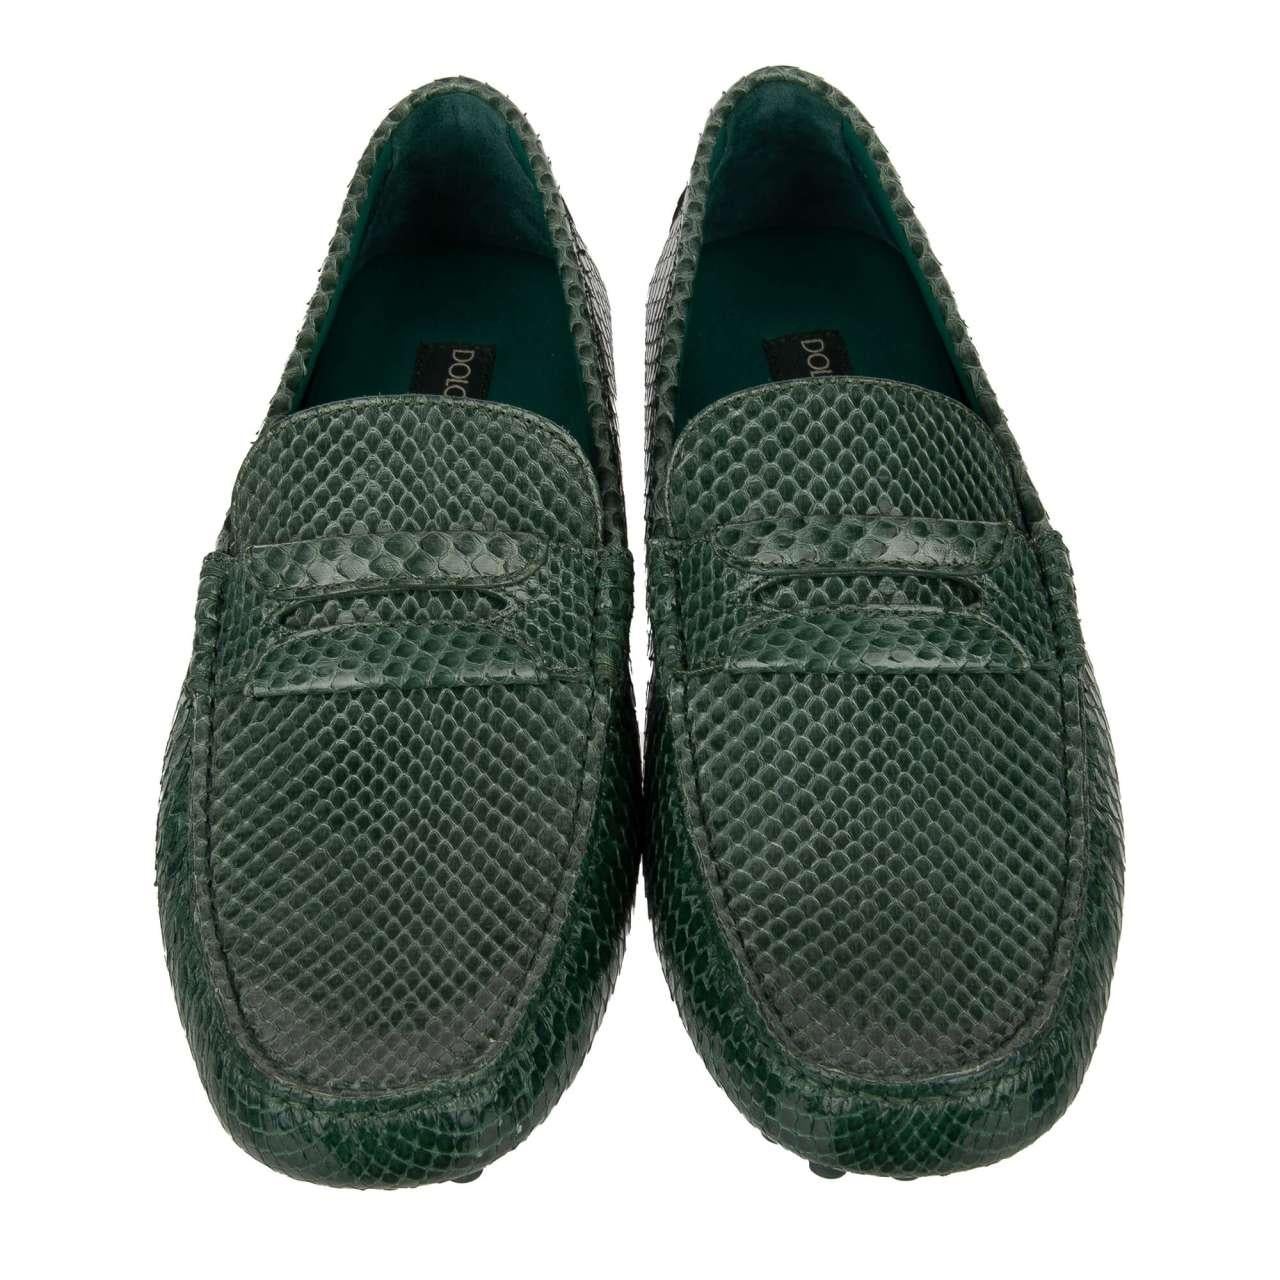 - Snake skin moccasins shoes GELA ZERO with DG metal logo in green by DOLCE & GABBANA - MADE IN ITALY - New with Box - Model: A30048-A2F08-80539 - Material: 95% Snake skin, 5% Calfskin - Sole: Rubber - Color: Green - Metal DG Logo - Leather footbed